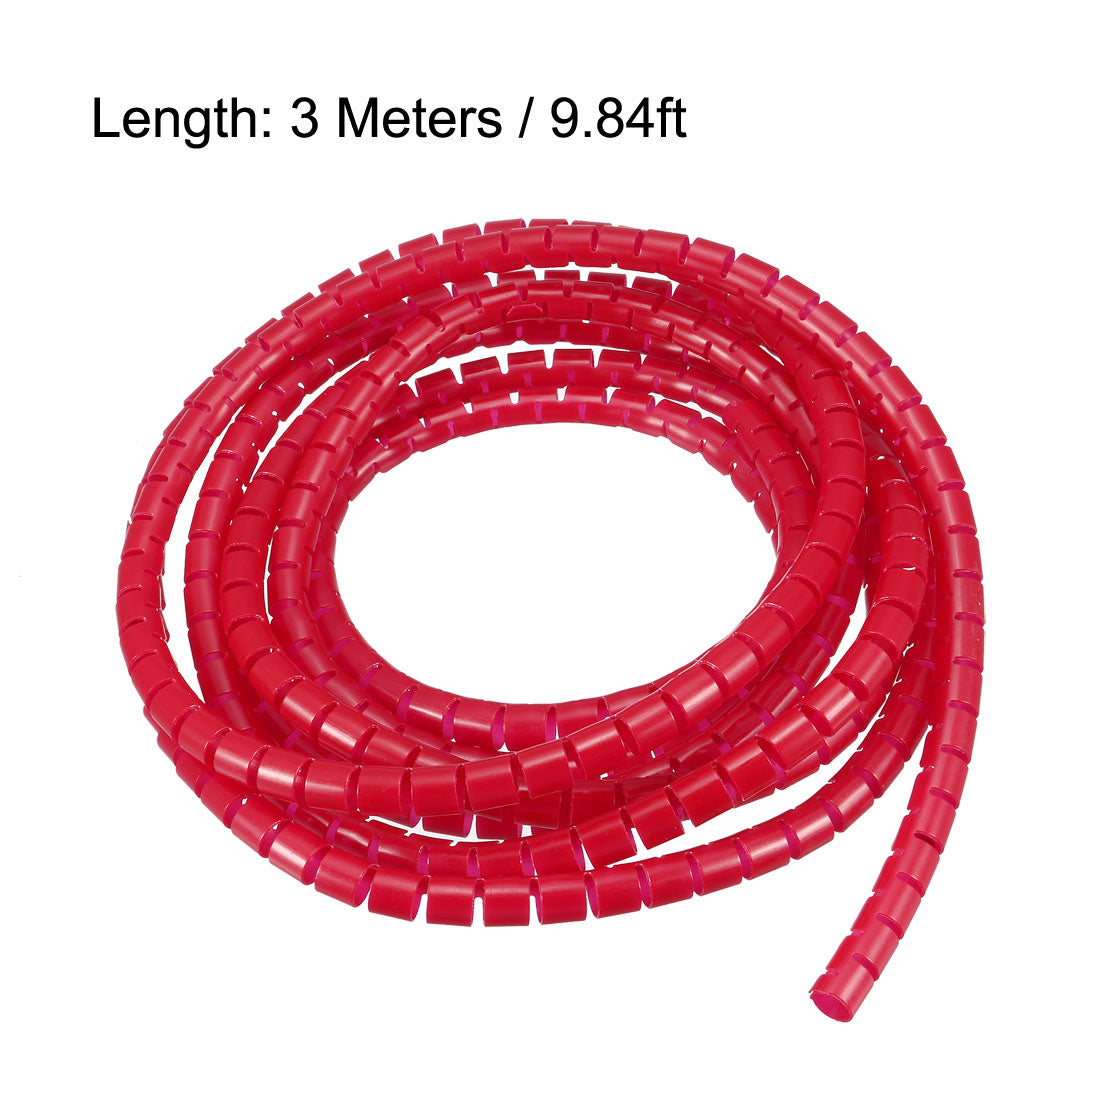 uxcell Uxcell Cable Management Sleeve Wire Wrap Cord Organizer 7mm x 8mm 3 Meters Length Red